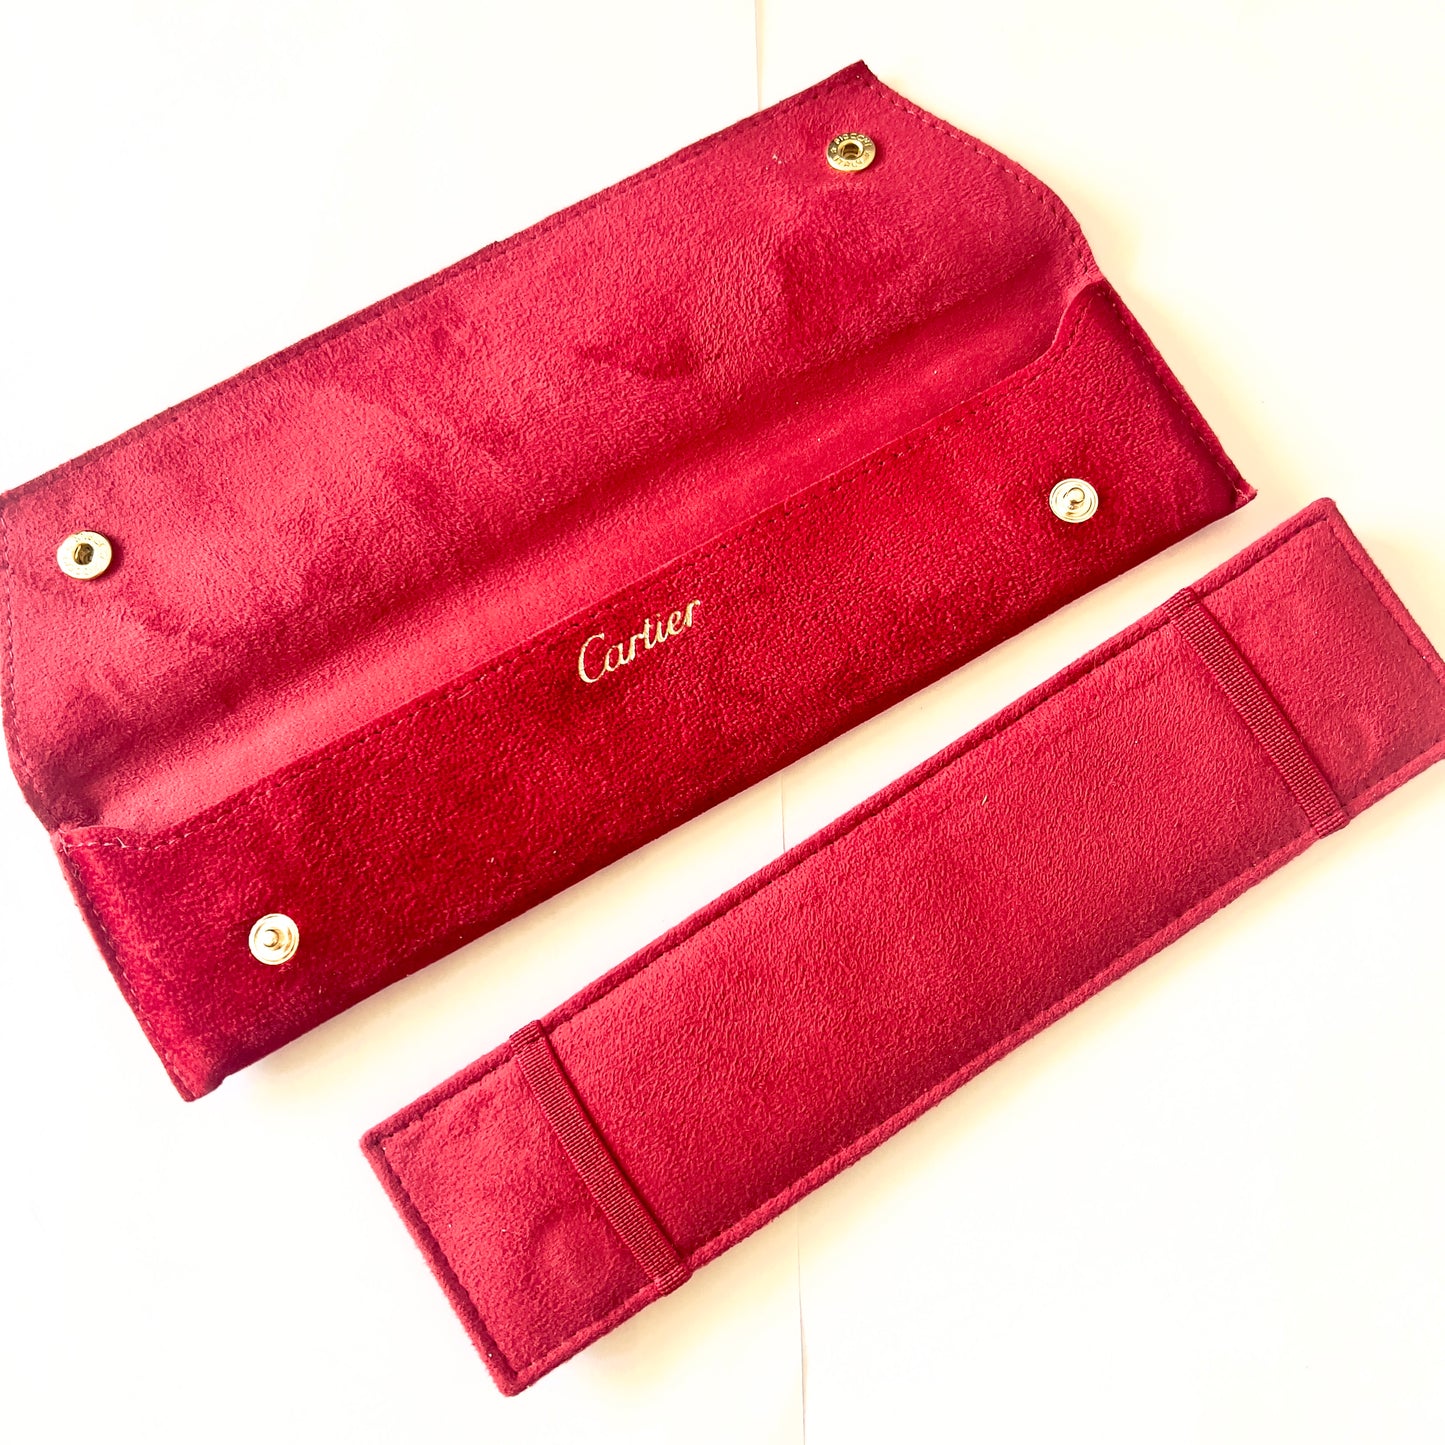 CARTIER Red Faux Suede Pouch 8.5x2.25x0.25 inches